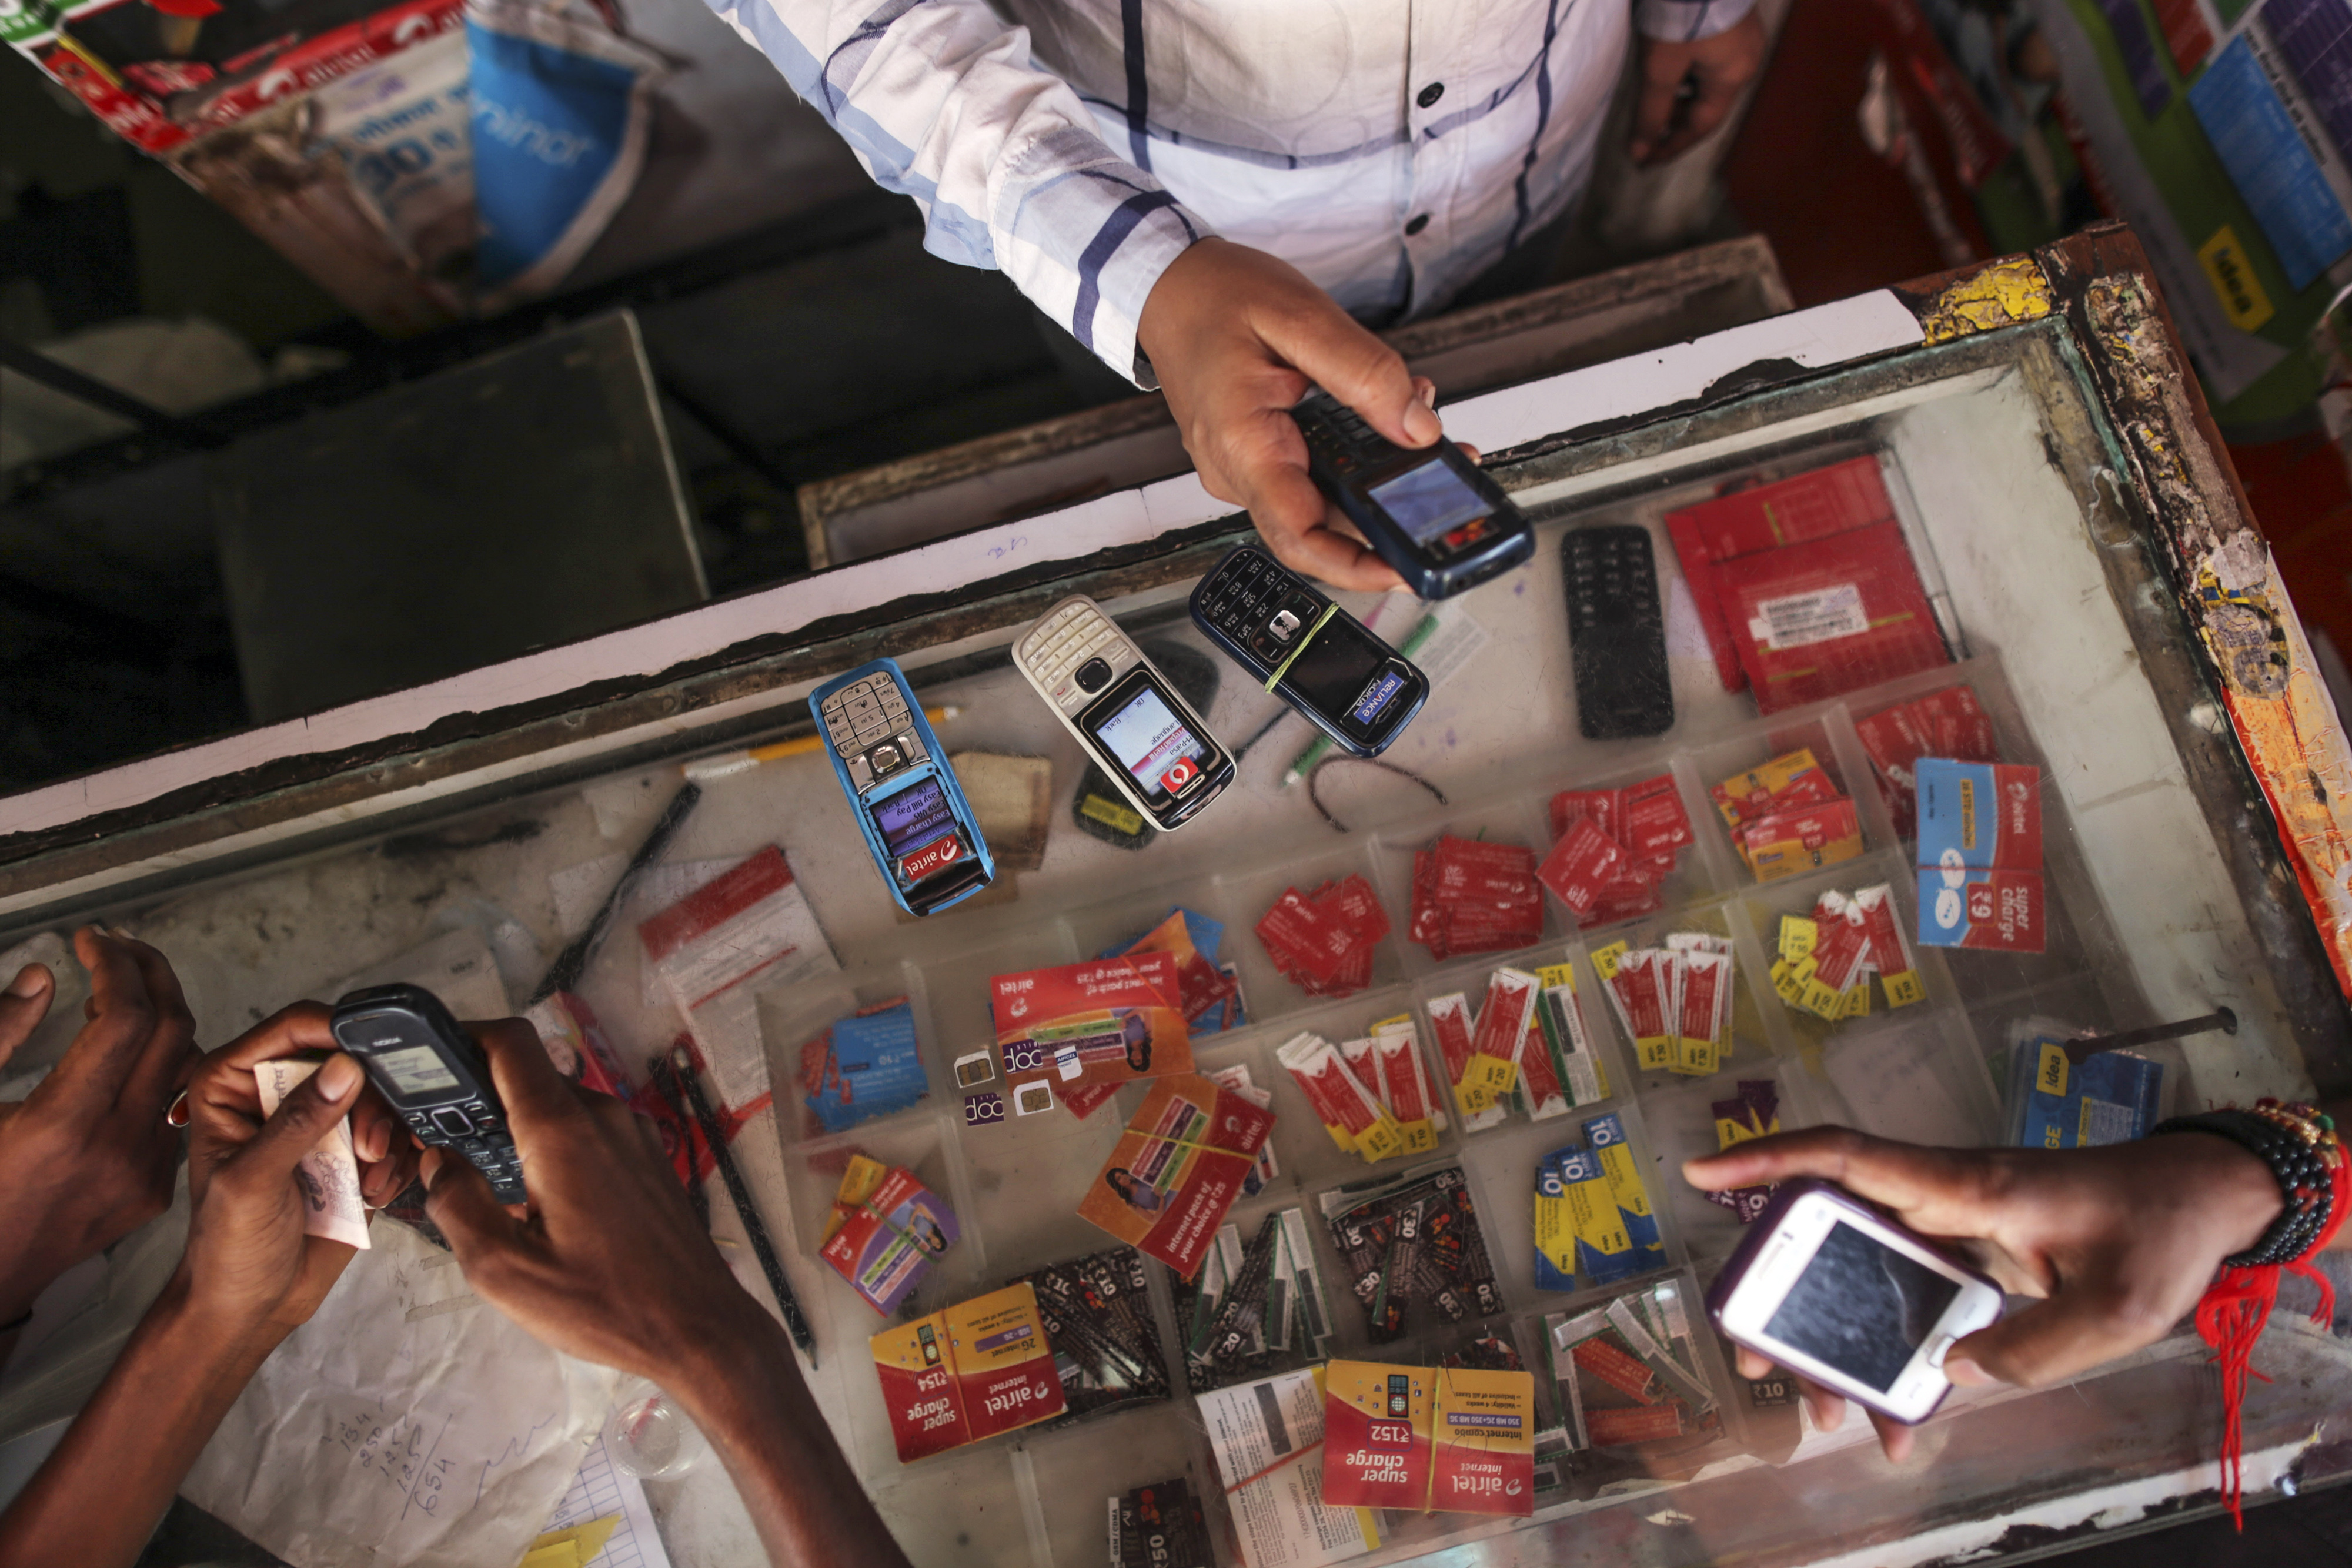 Customers wait to recharge their mobile phones at a mobile-phone store in Mumbai on Aug. 12, 2014 (Dhiraj Singh—Bloomberg/Getty Images)